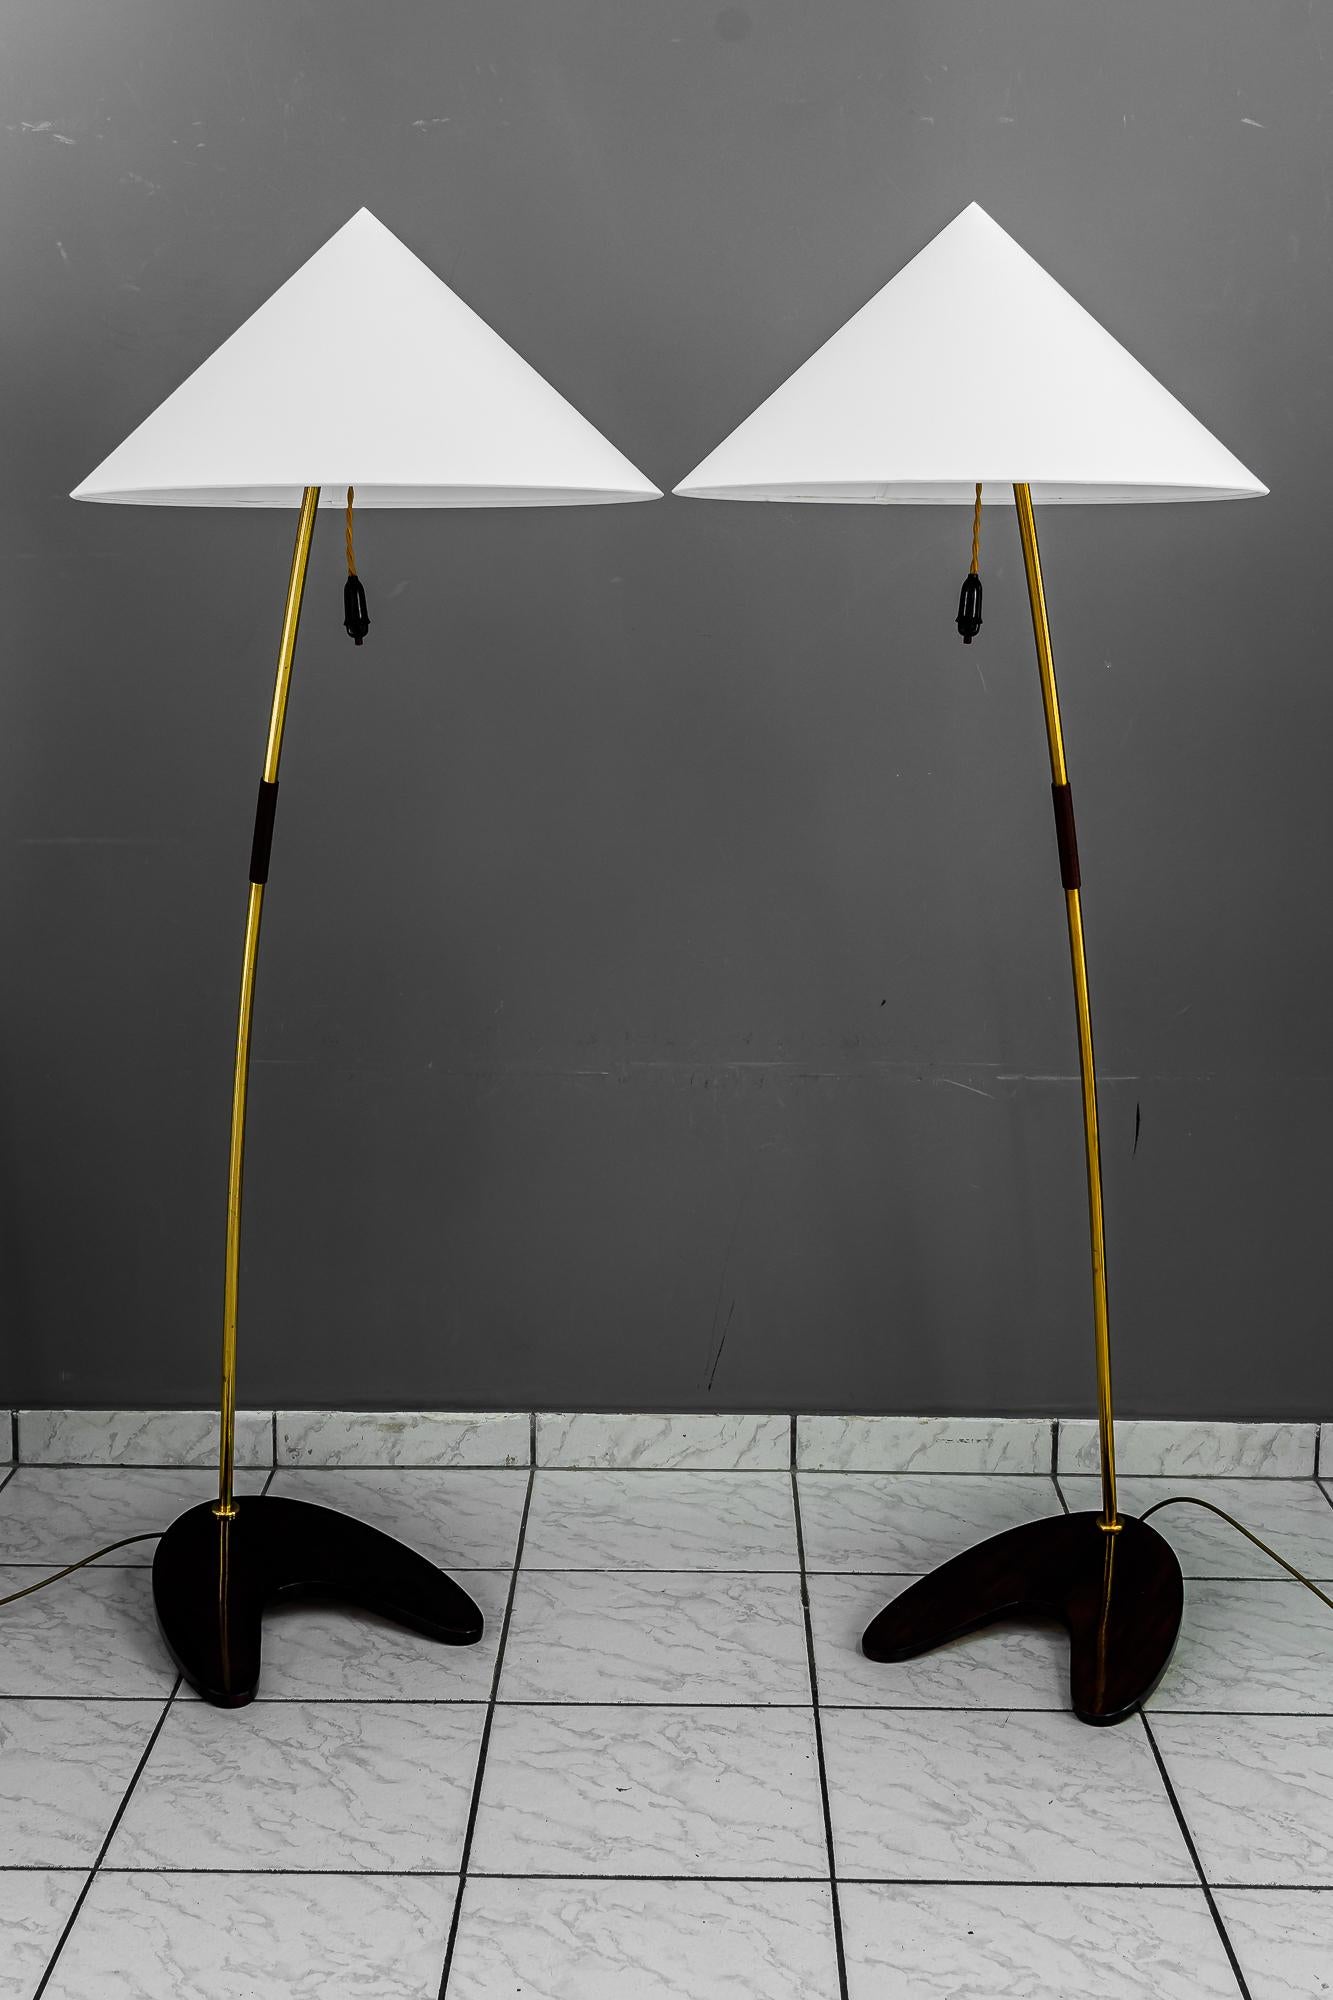 Two Rupert Nikoll floor lamps vienna around 1950s
Brass and wood
Original condition
The shades are replaced ( new )
Bulb is E27 up to 100 watts.